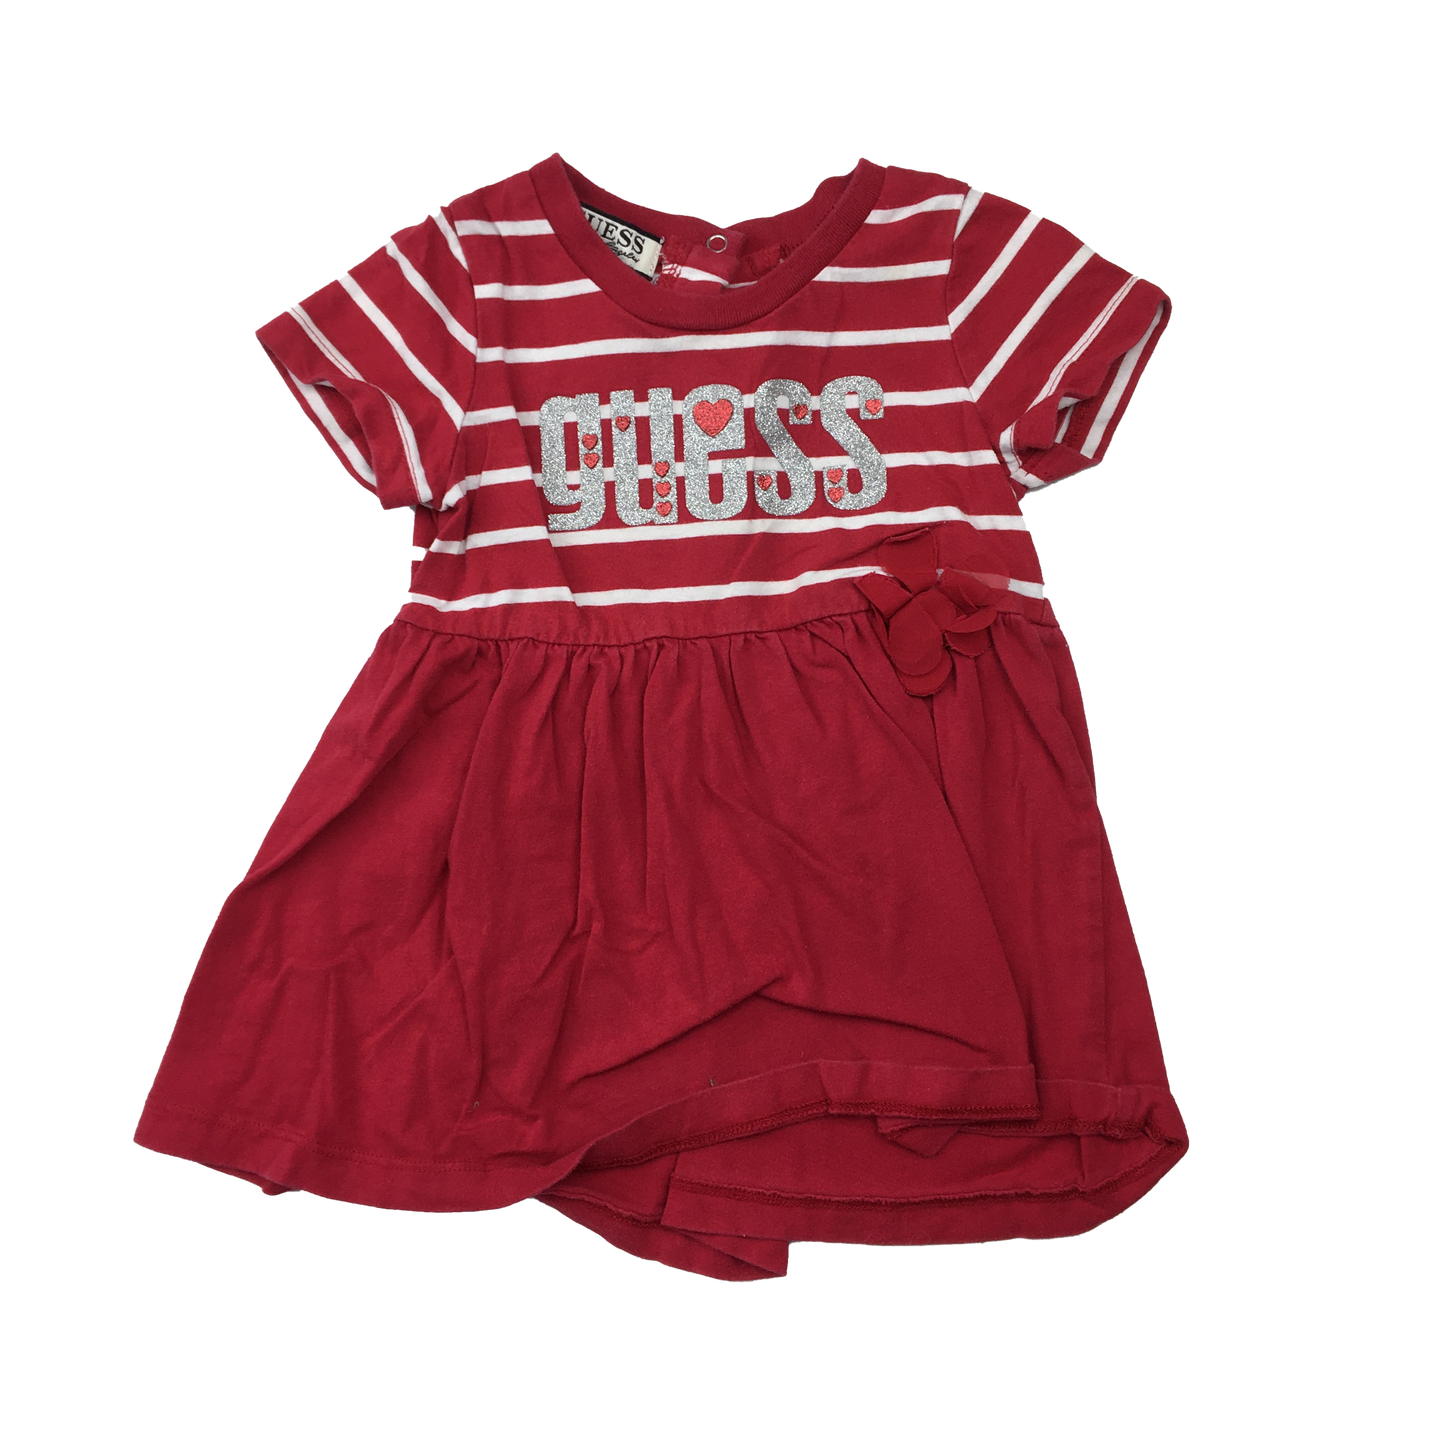 Guess Red & White Stipe Top Dress 18M